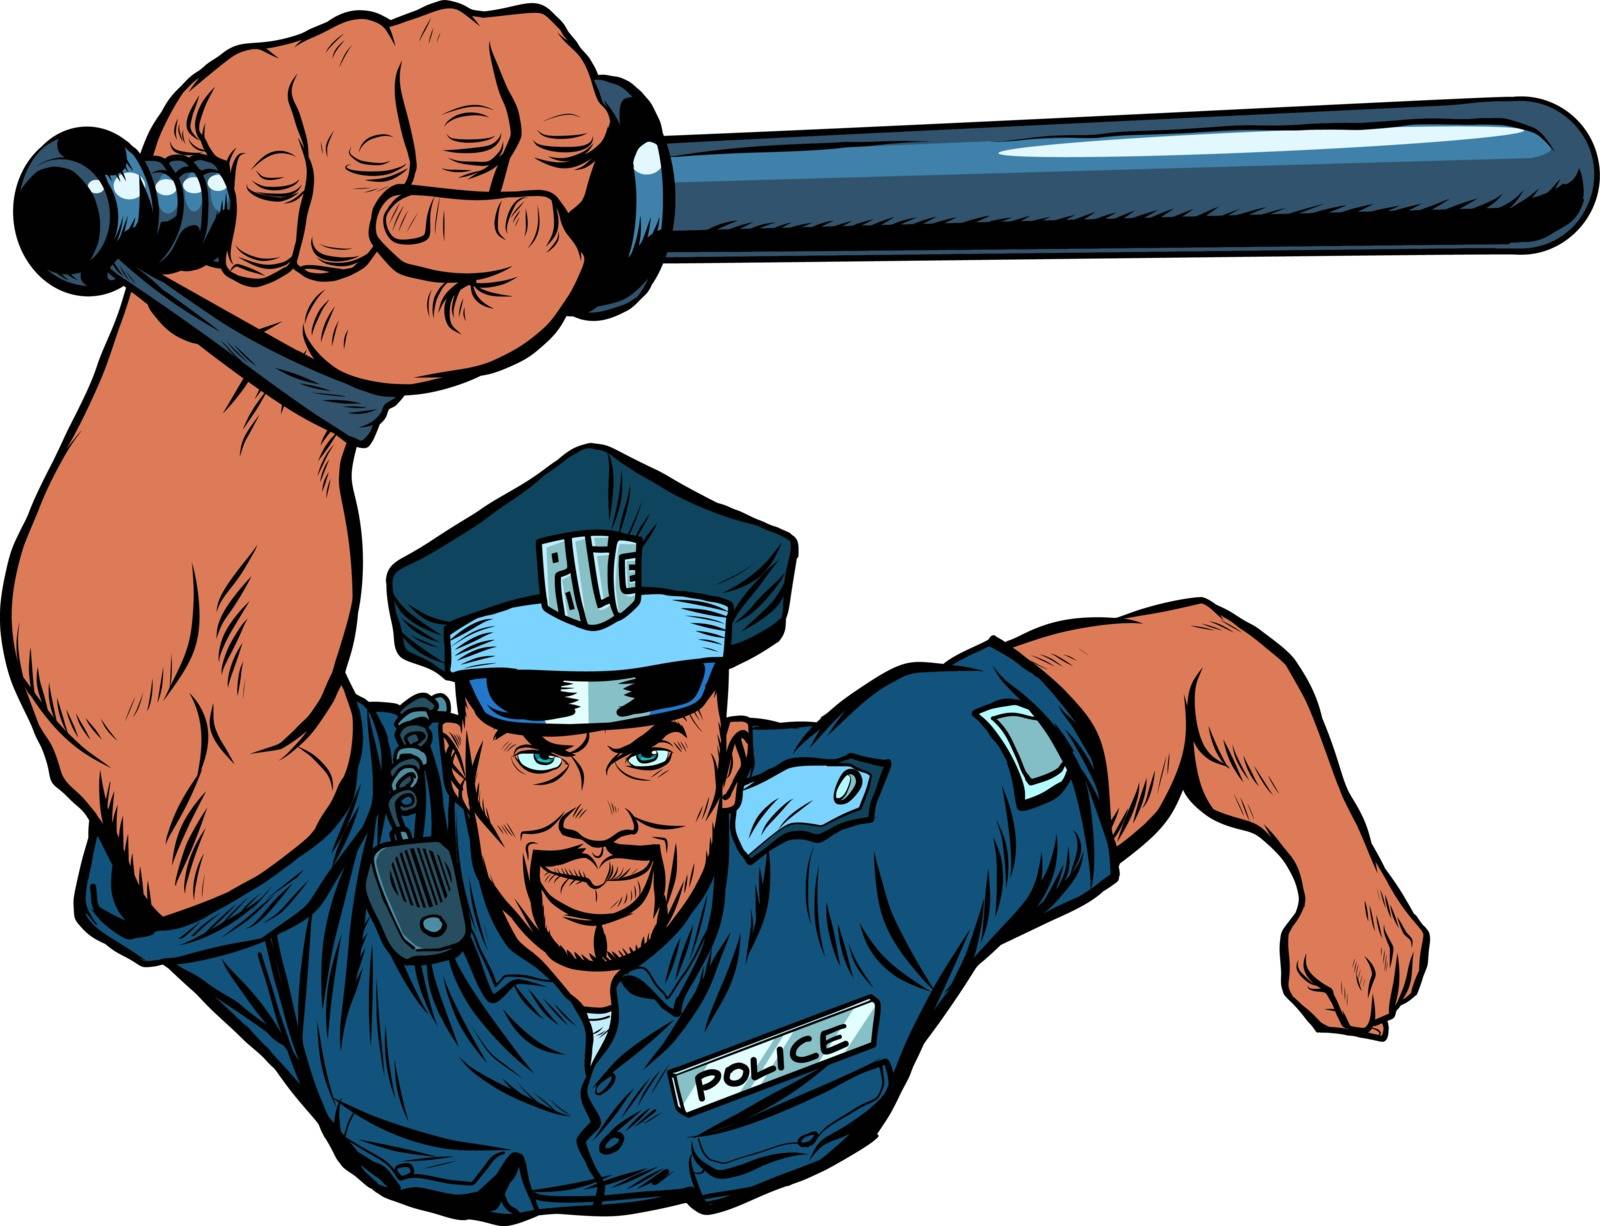 African Police officer with a baton by studiostoks